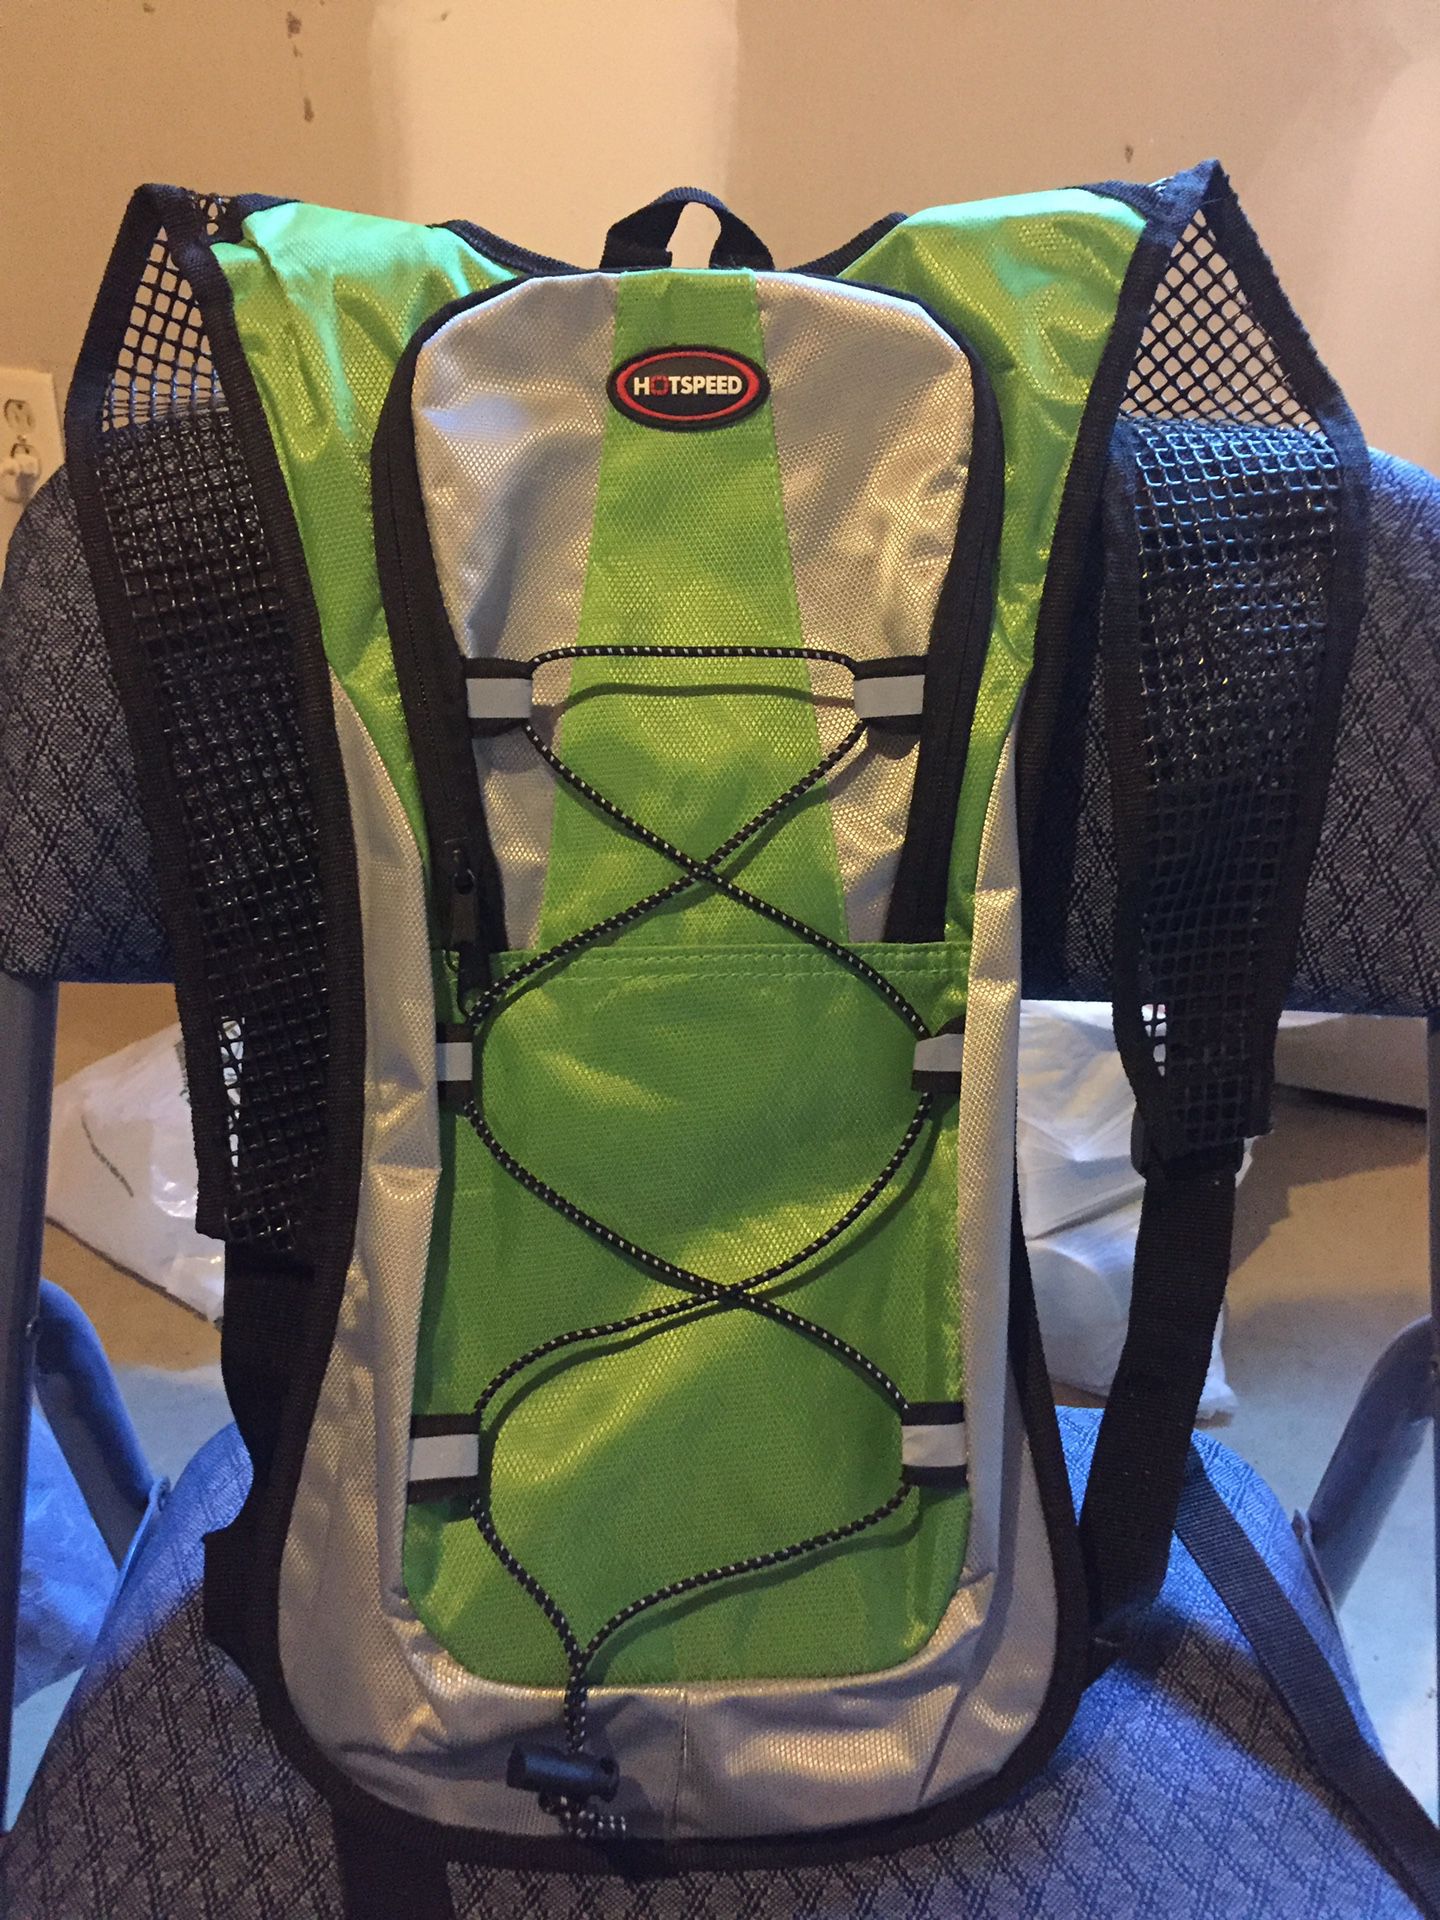 New ‘Hotspeed’ bicycling backpack. Lime green for easy visibility